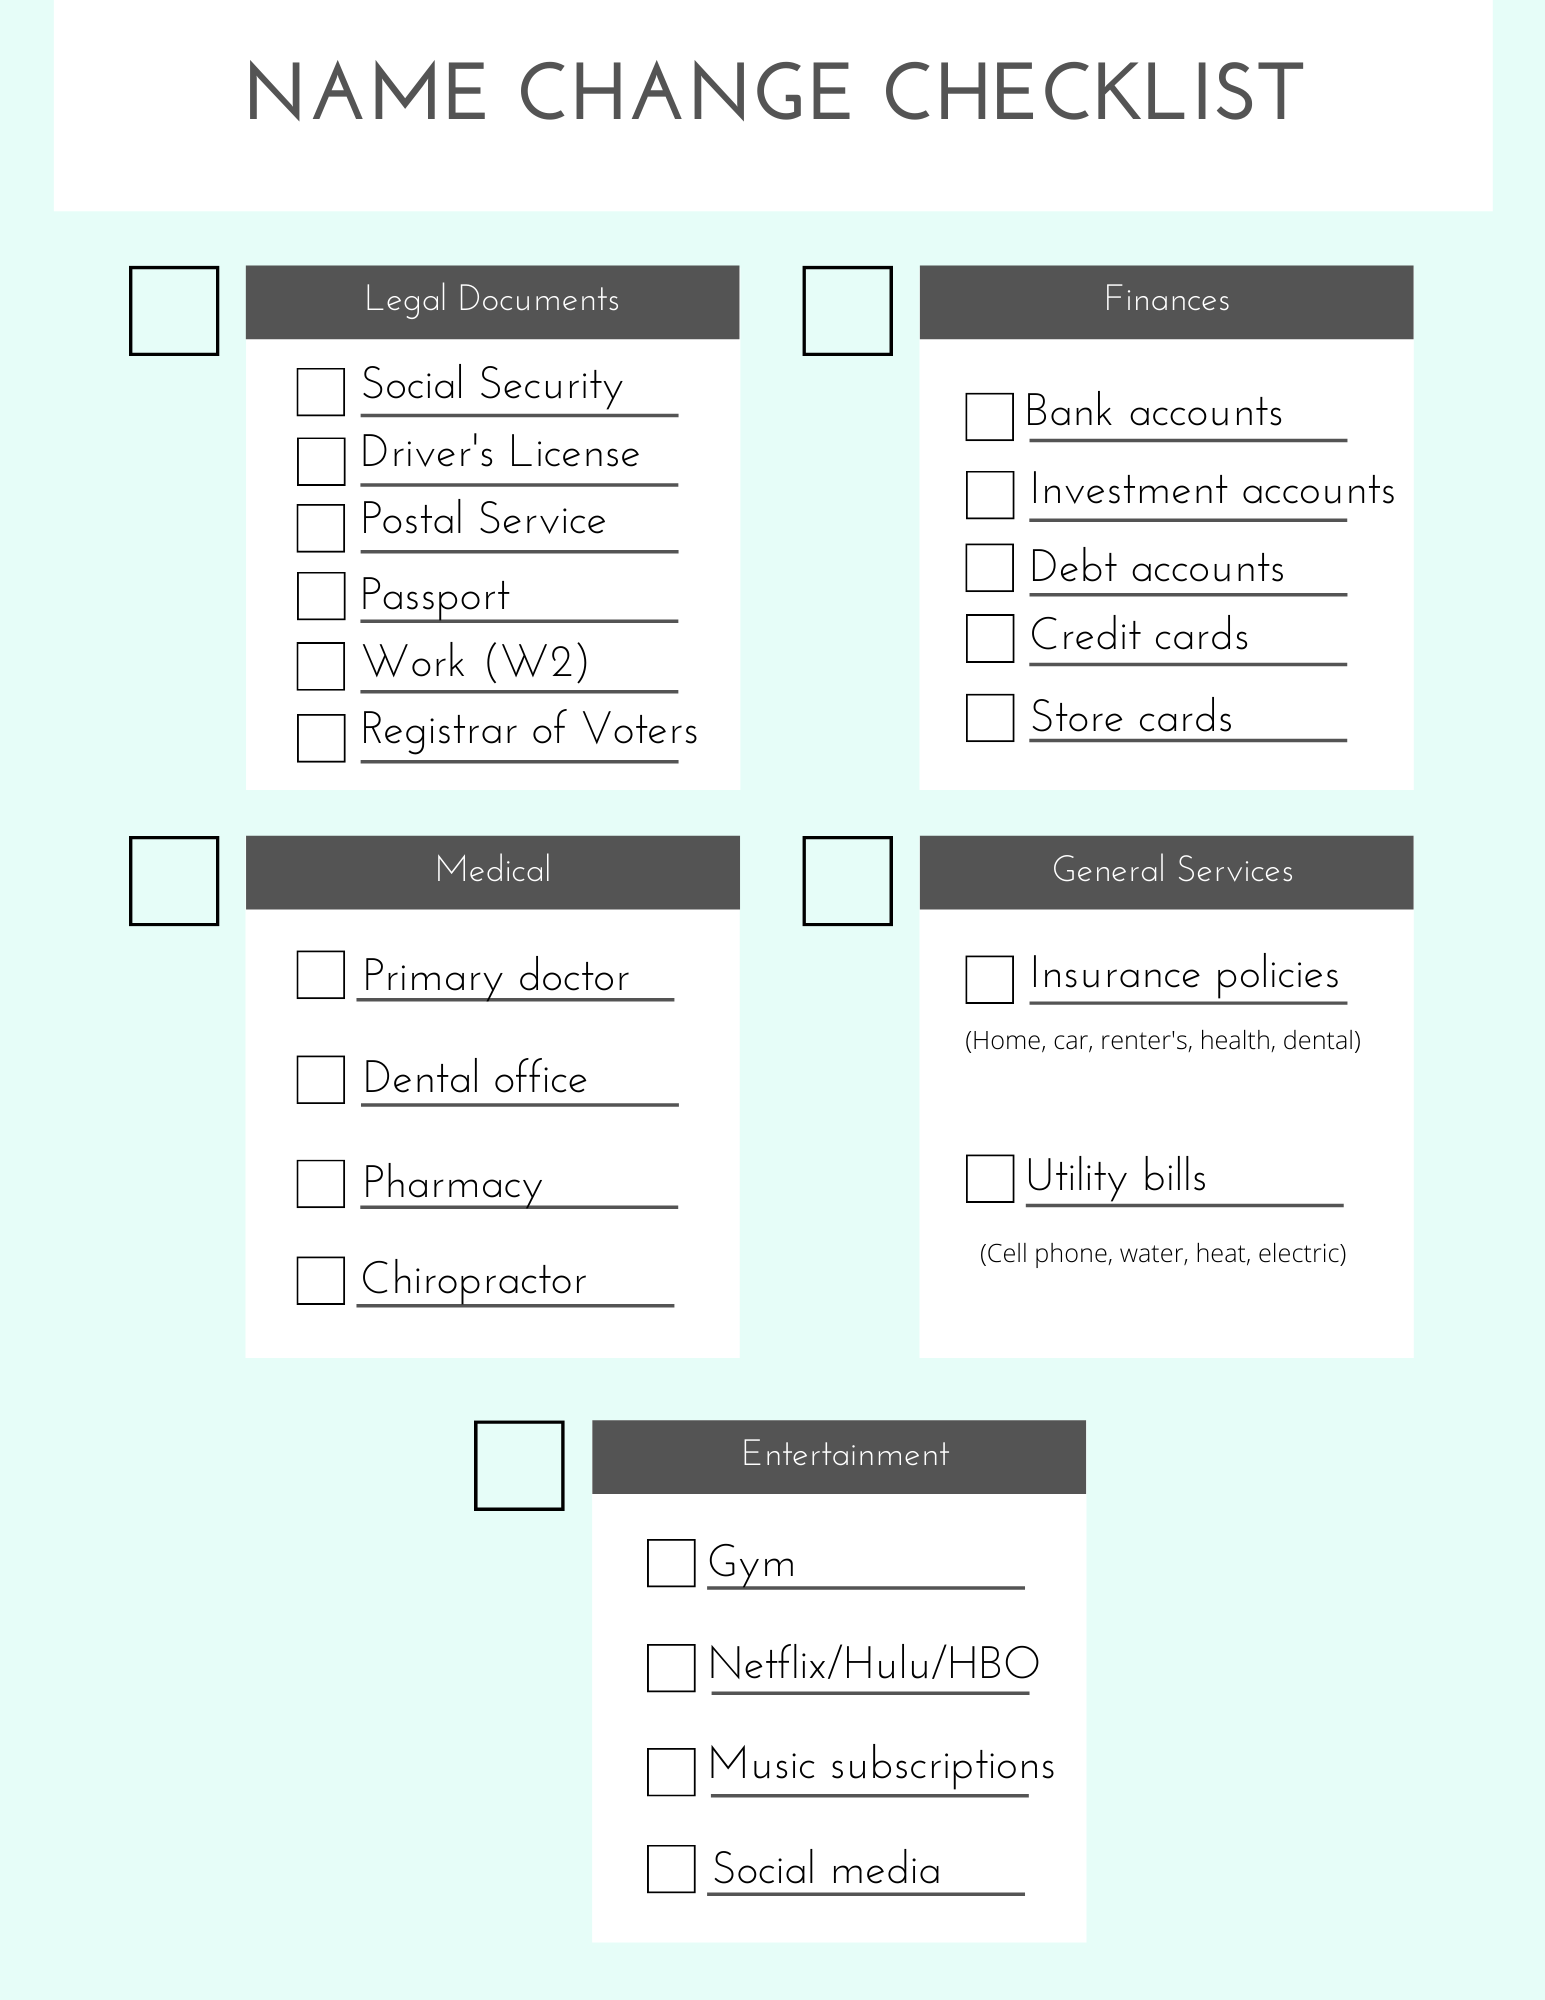 The Comprehensive Wedding Name Change Checklist You ve Been Looking For